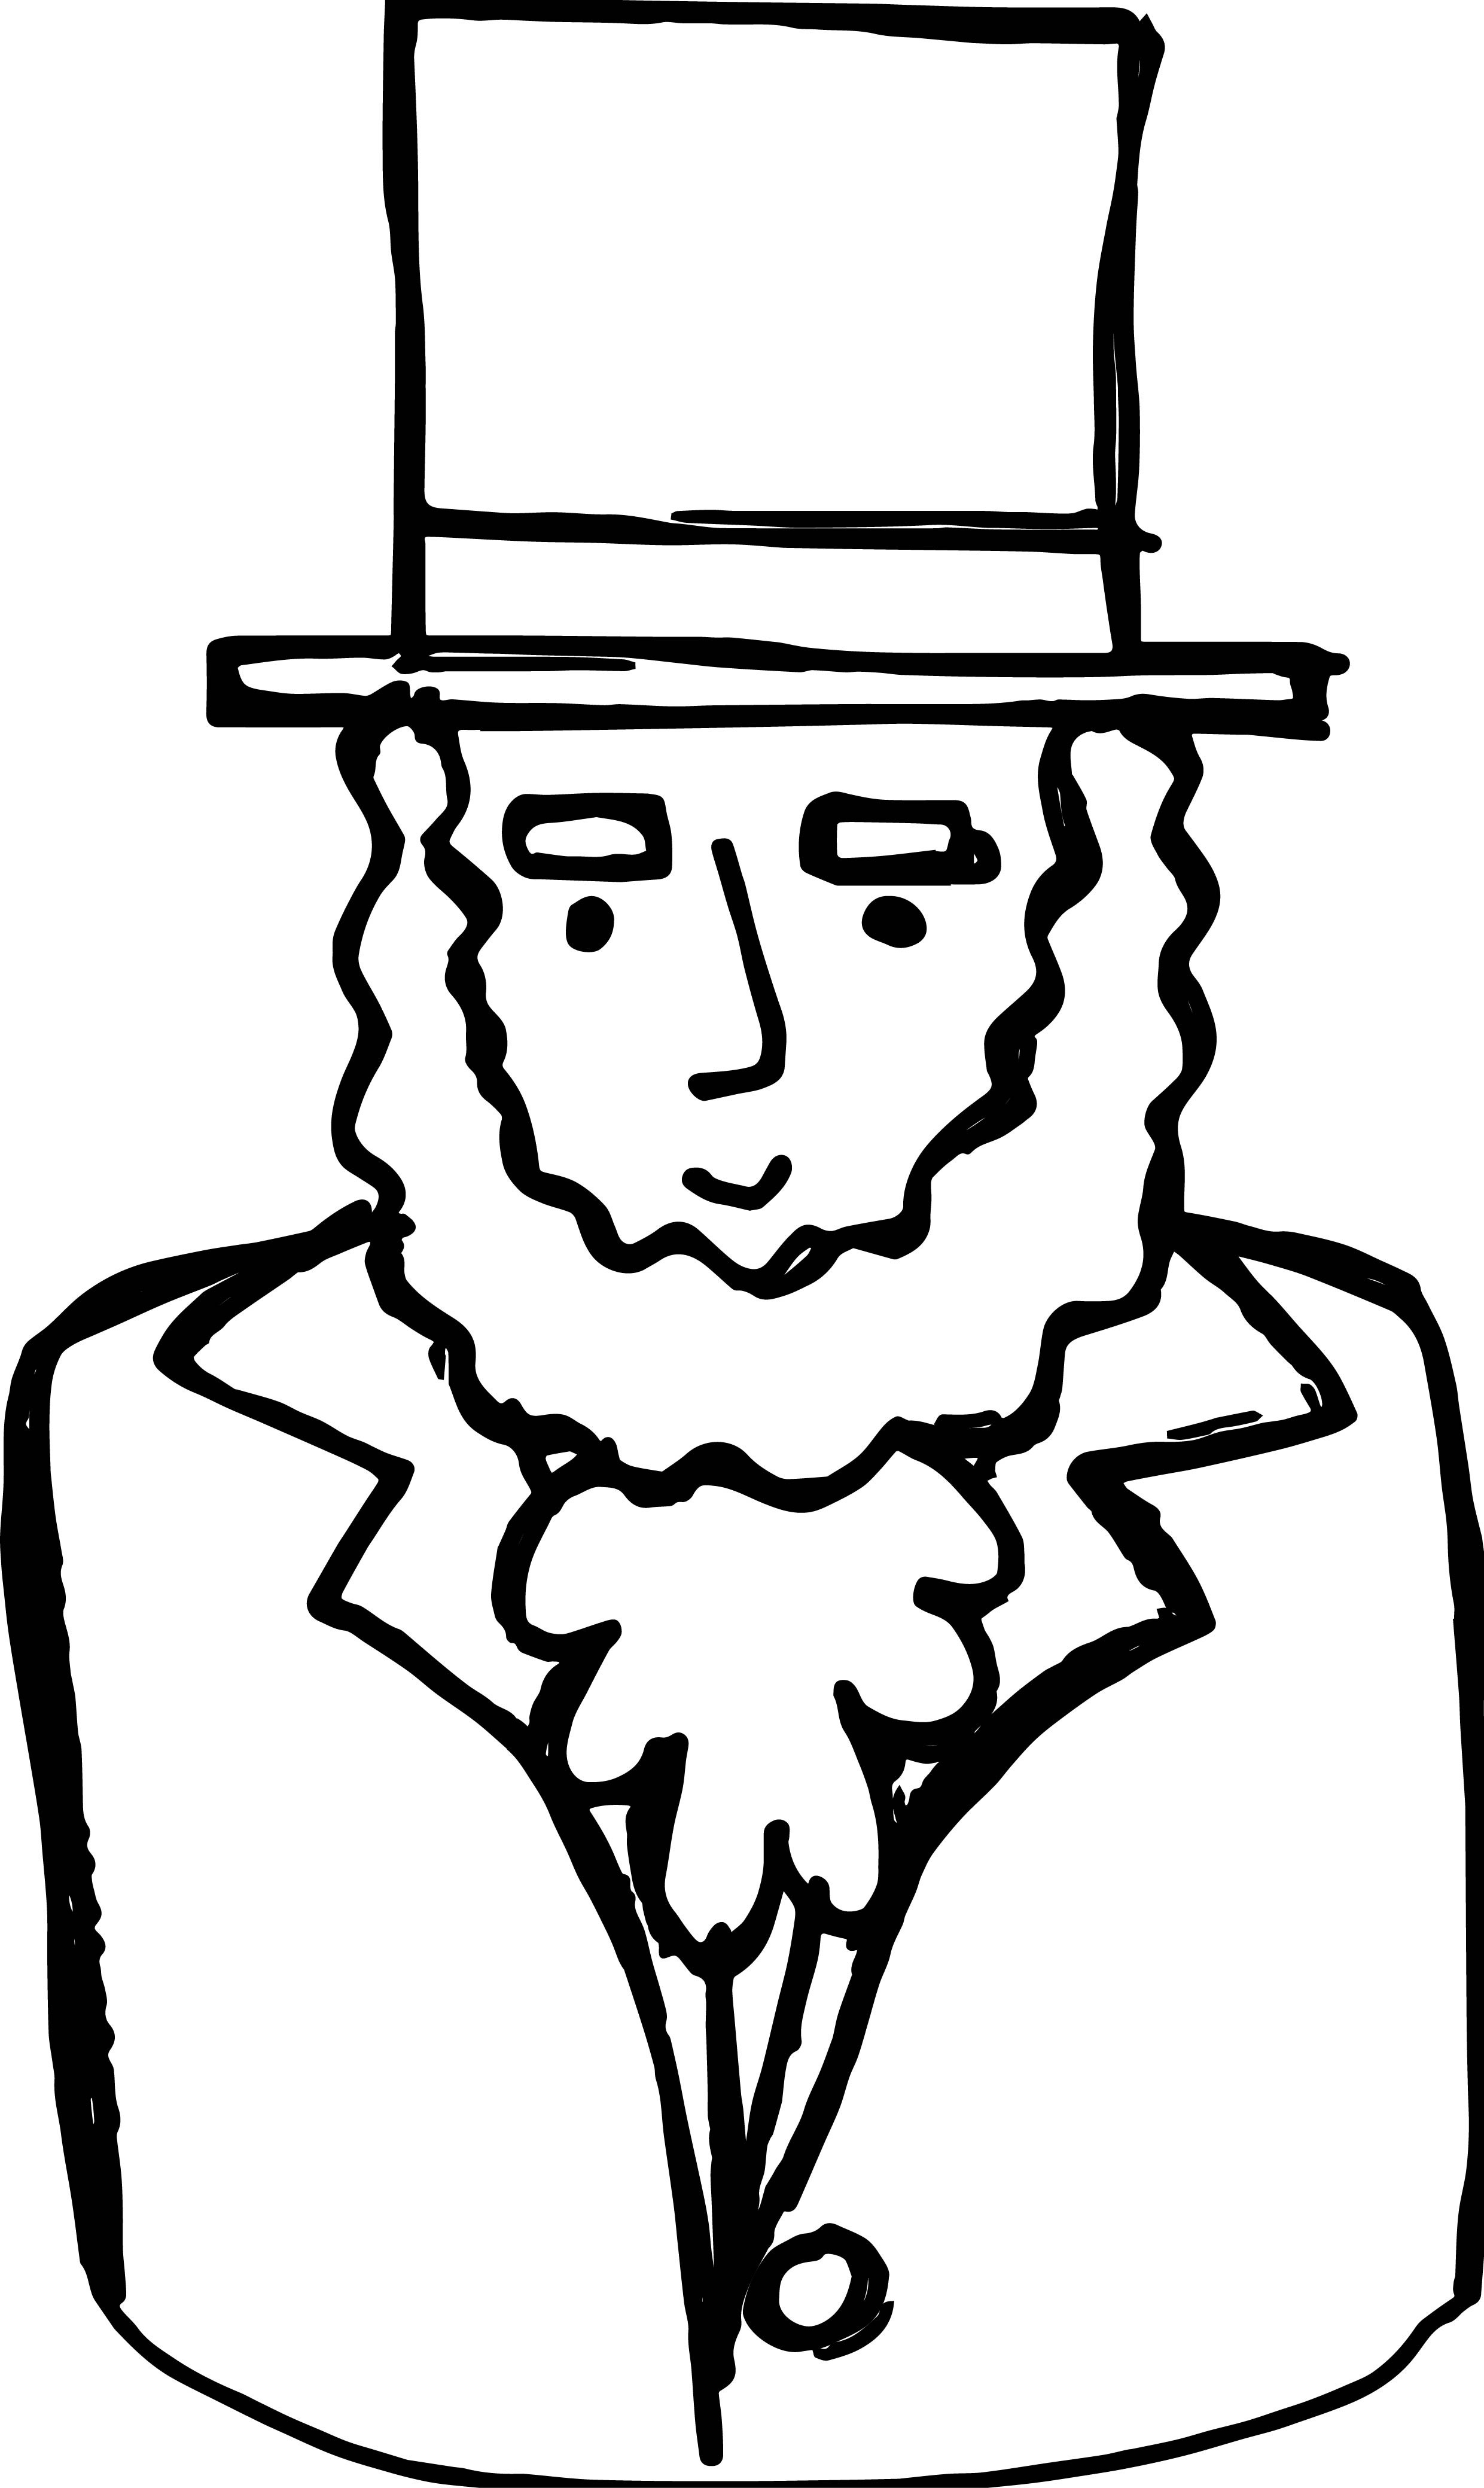 Abraham lincoln clipart simple. With hat drawing at